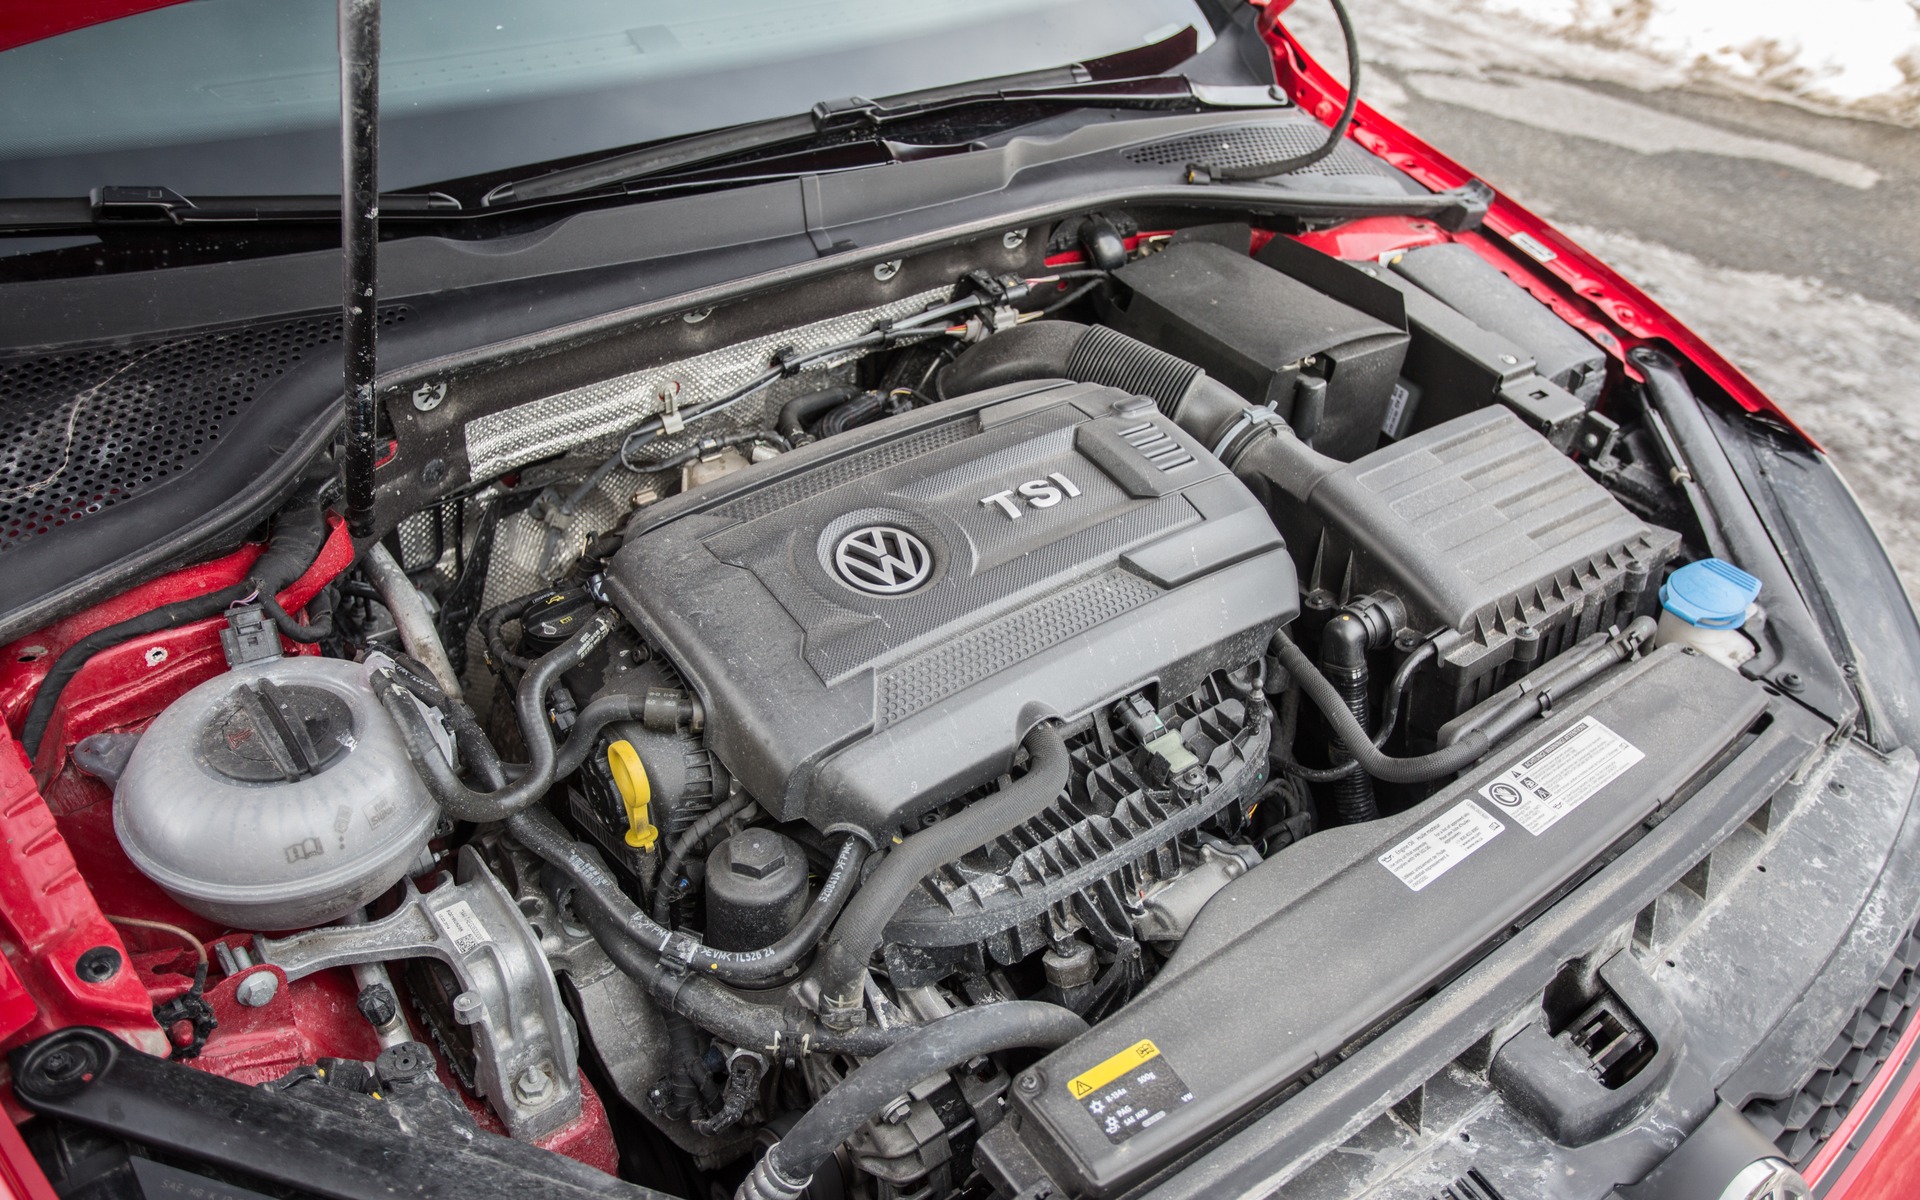 The 2-litre engine develops 210 horsepower and 258 lbs.-ft. of torque.